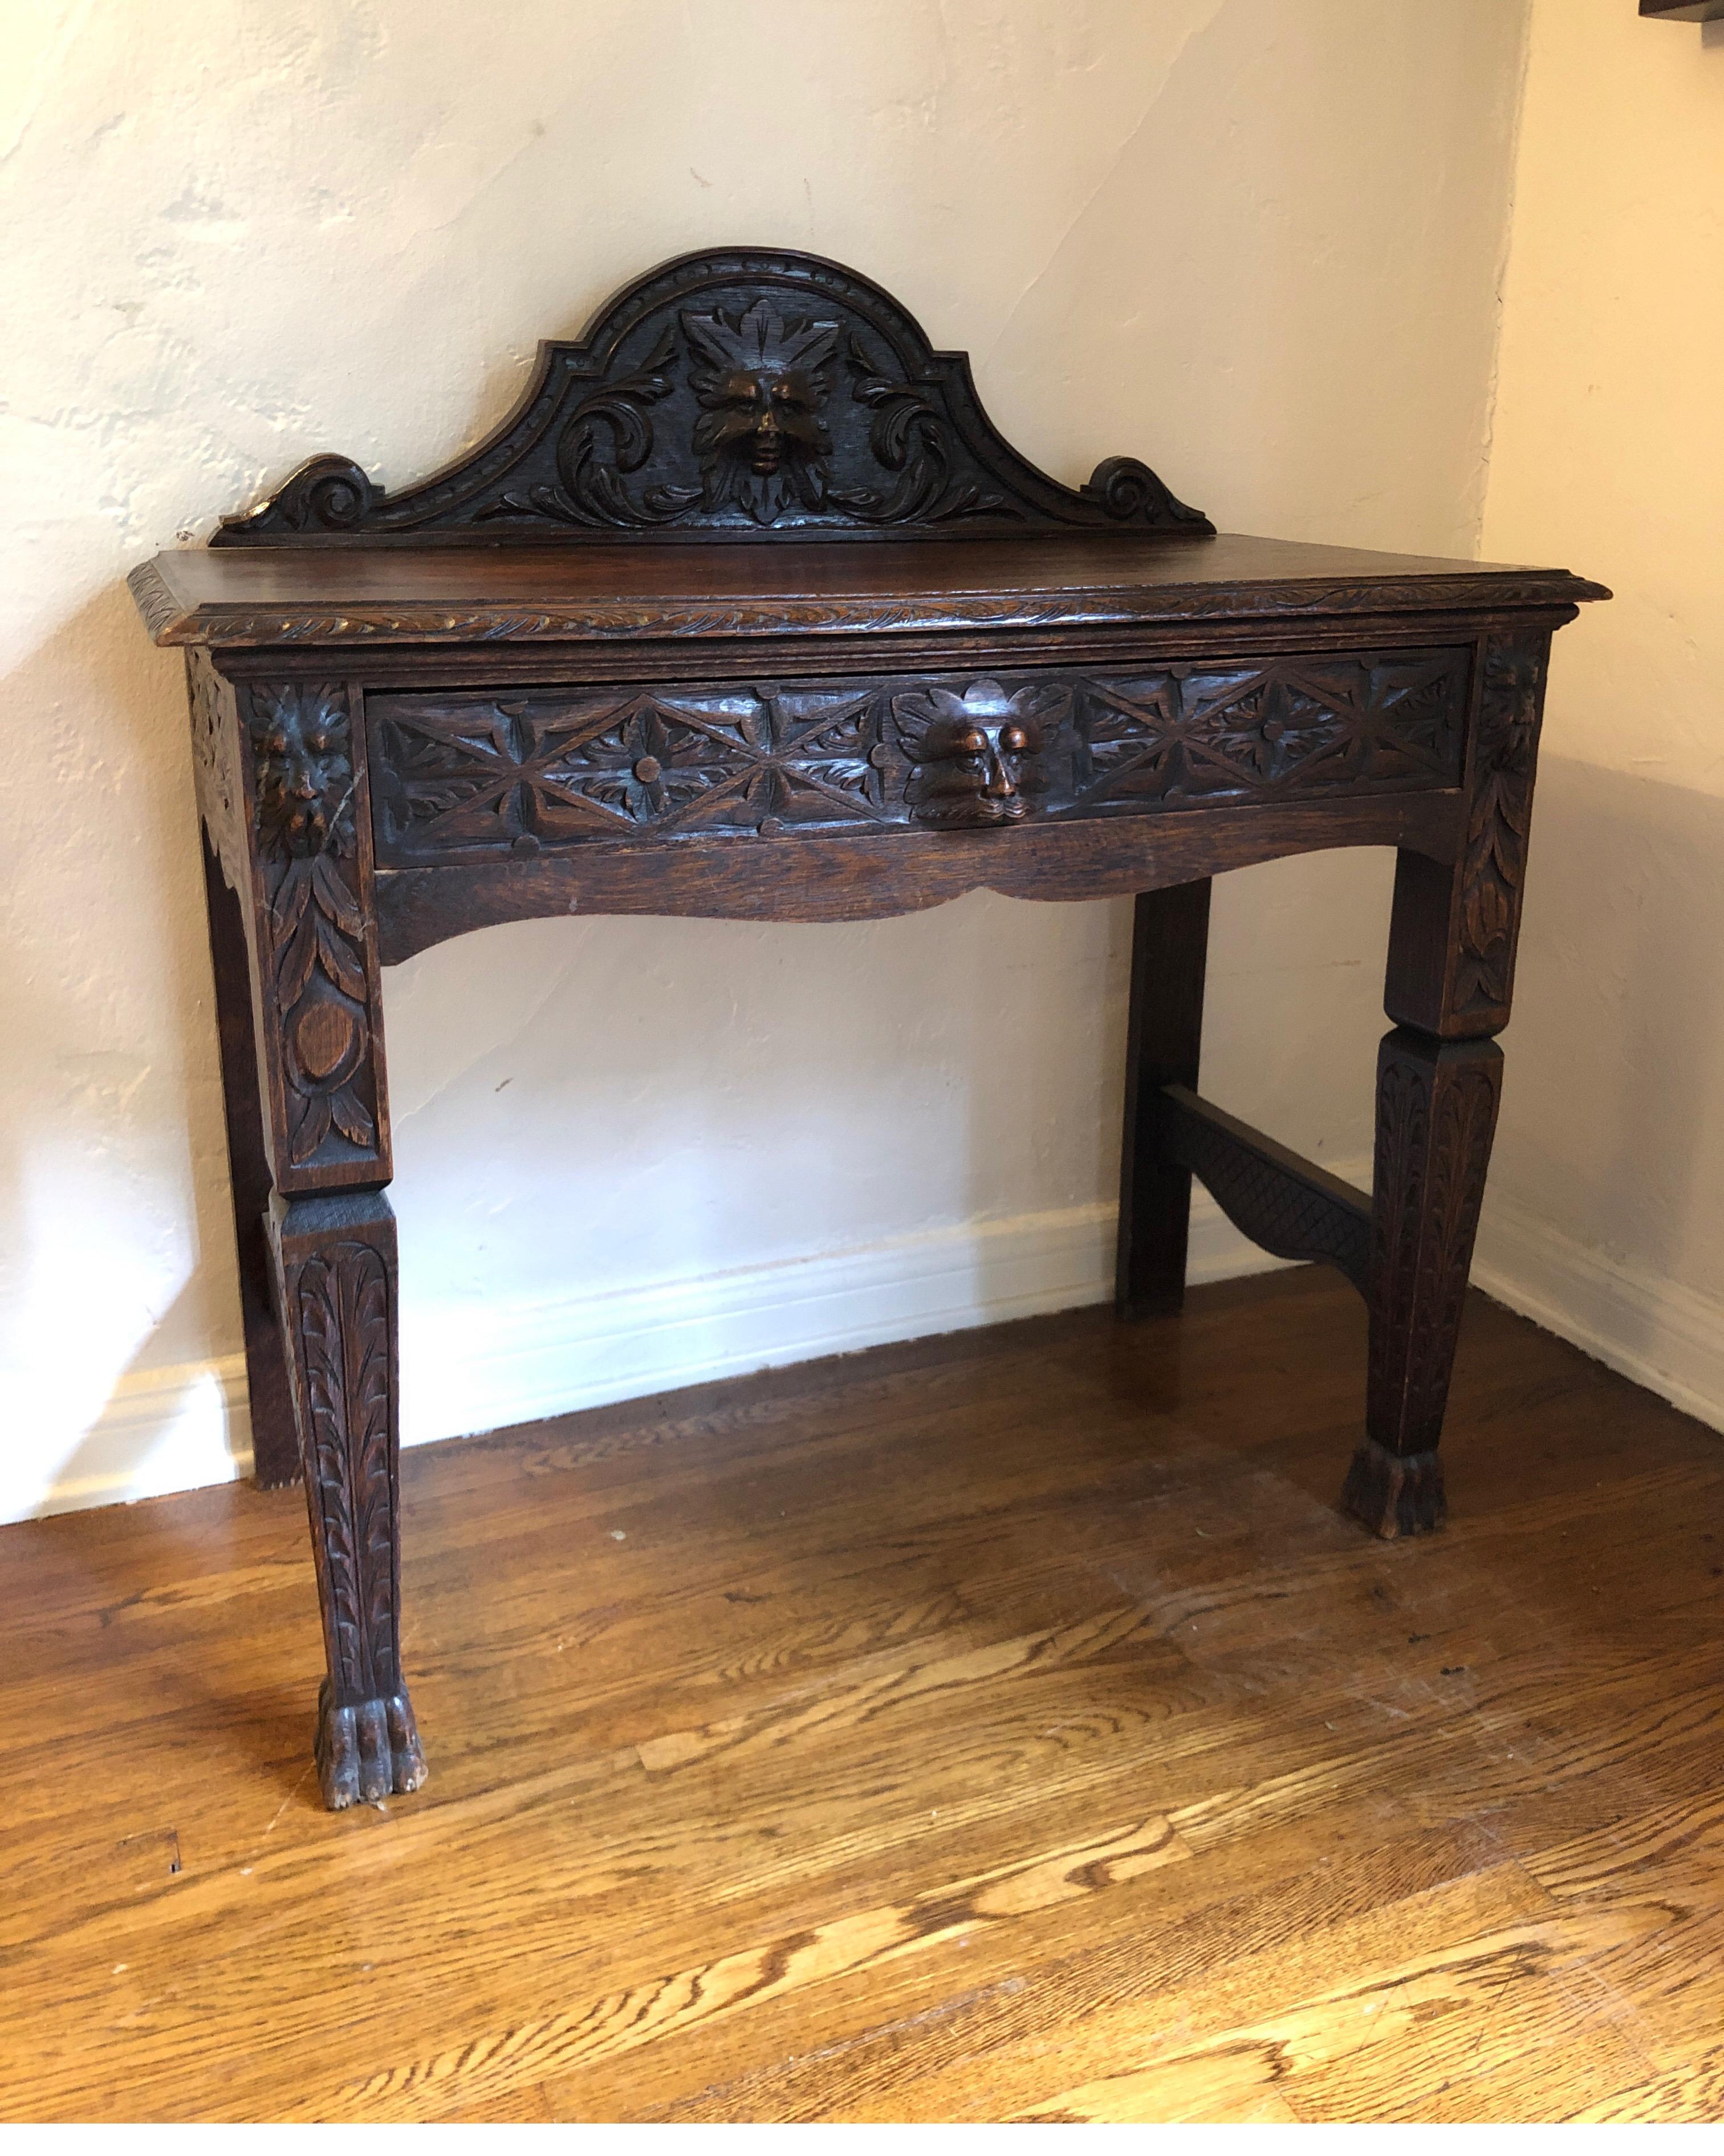 Green Man Edwardian Oak, a pagan deity of vegetation or rebirth. 
Carved antique oak hall table or entry table. Deep rich color with patina 

Has one drawer. Upper carved piece along the back is separate and secured to the top by dowels.

29.5